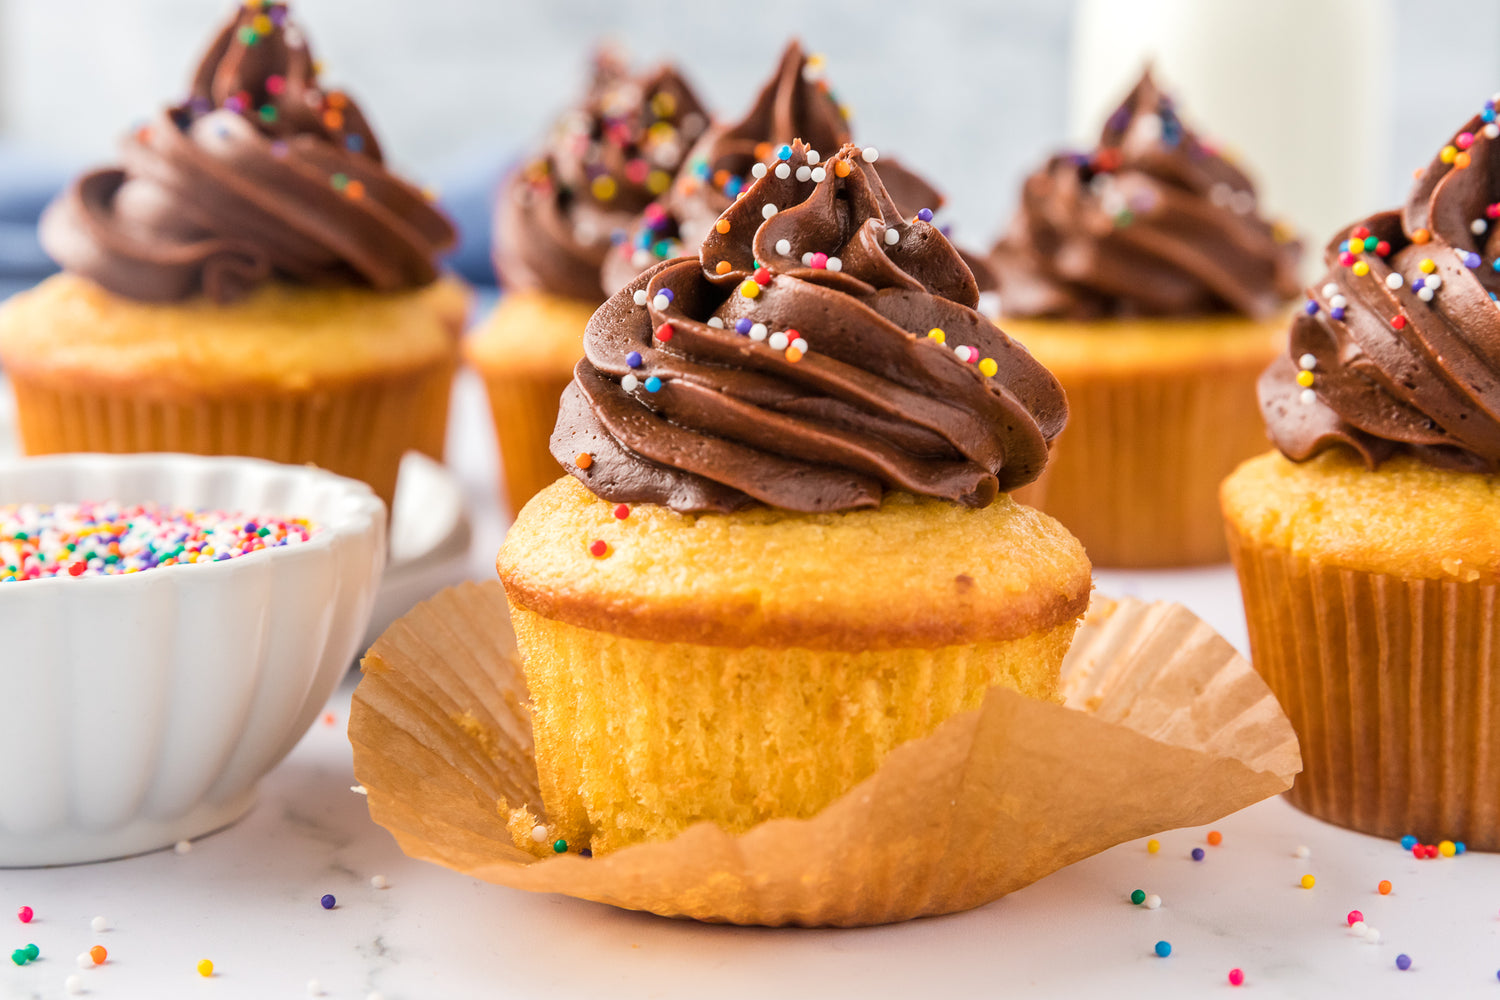 Yellow cupcakes with chocolate frosting